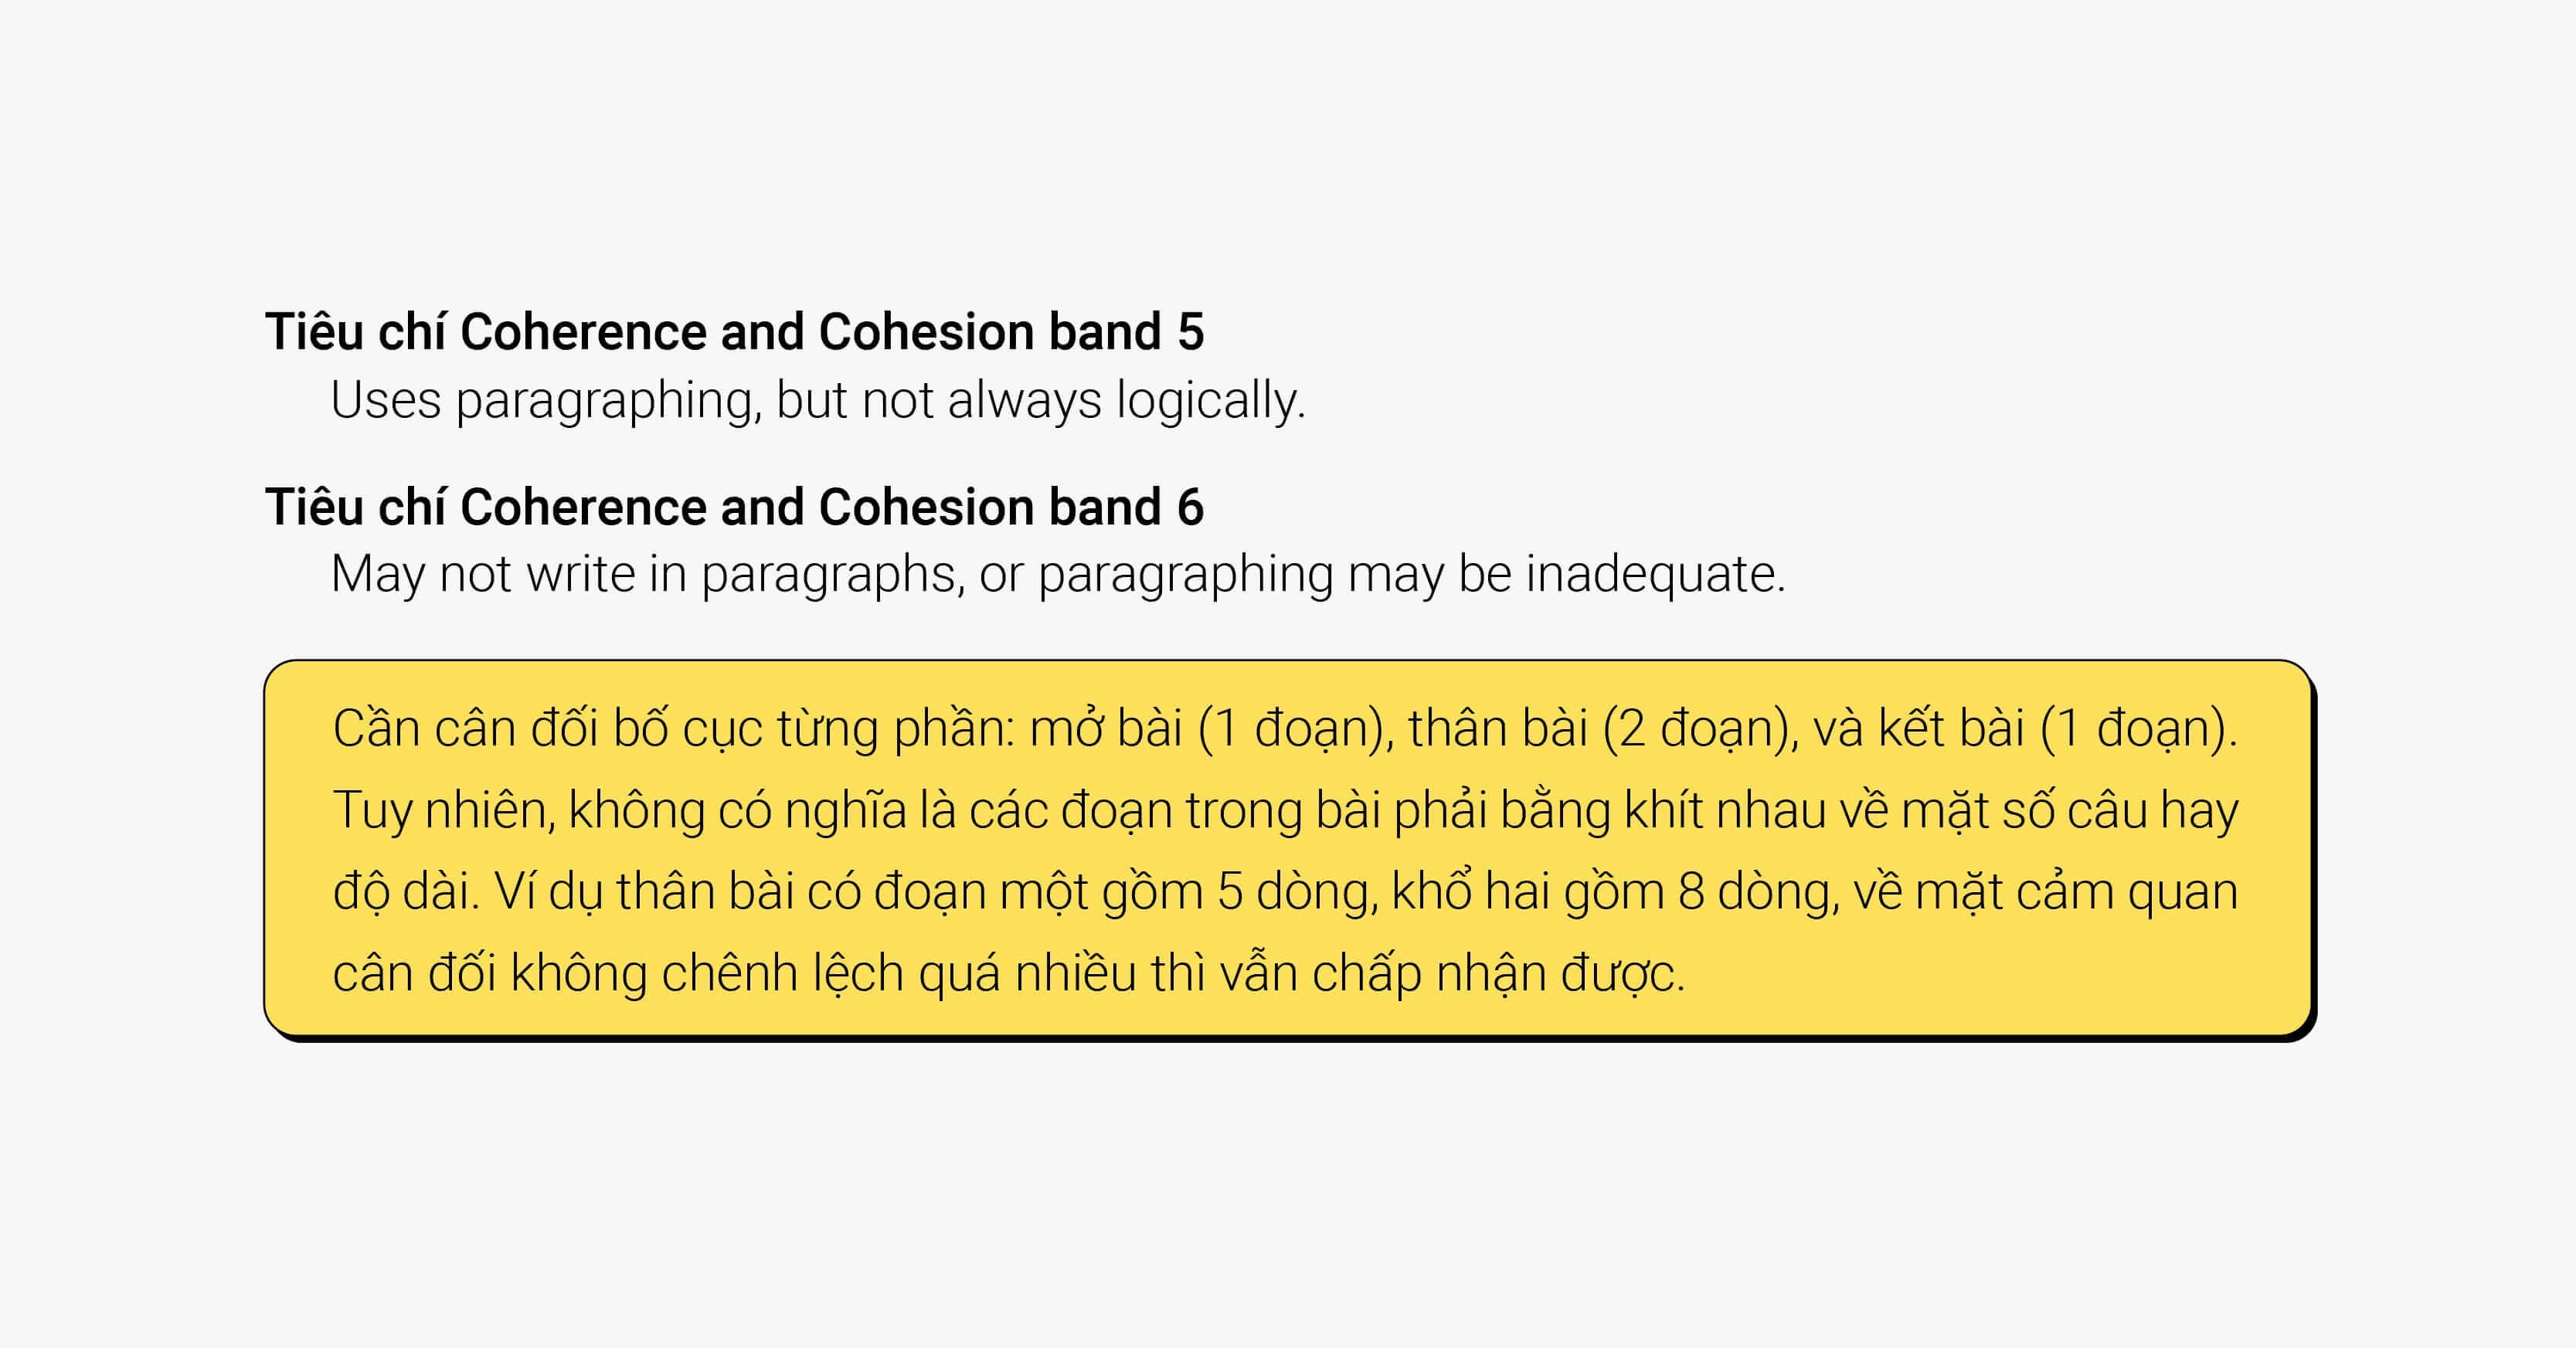 cach cai thien ielts writing band 50 len 60 phan 1 tieu chi coherence and cohesion va lexical resource